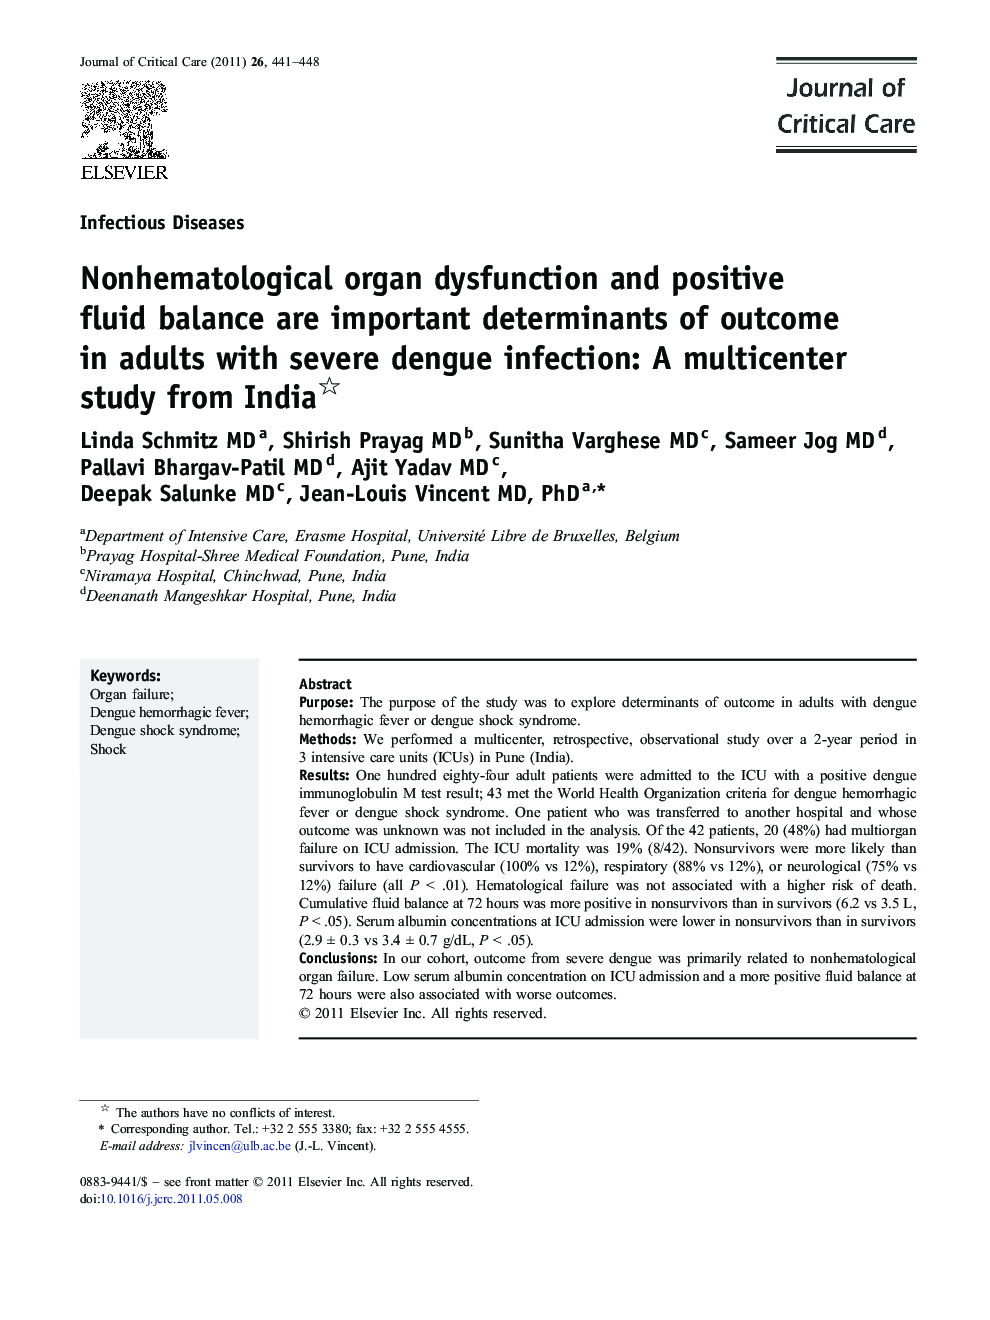 Nonhematological organ dysfunction and positive fluid balance are important determinants of outcome in adults with severe dengue infection: A multicenter study from India 